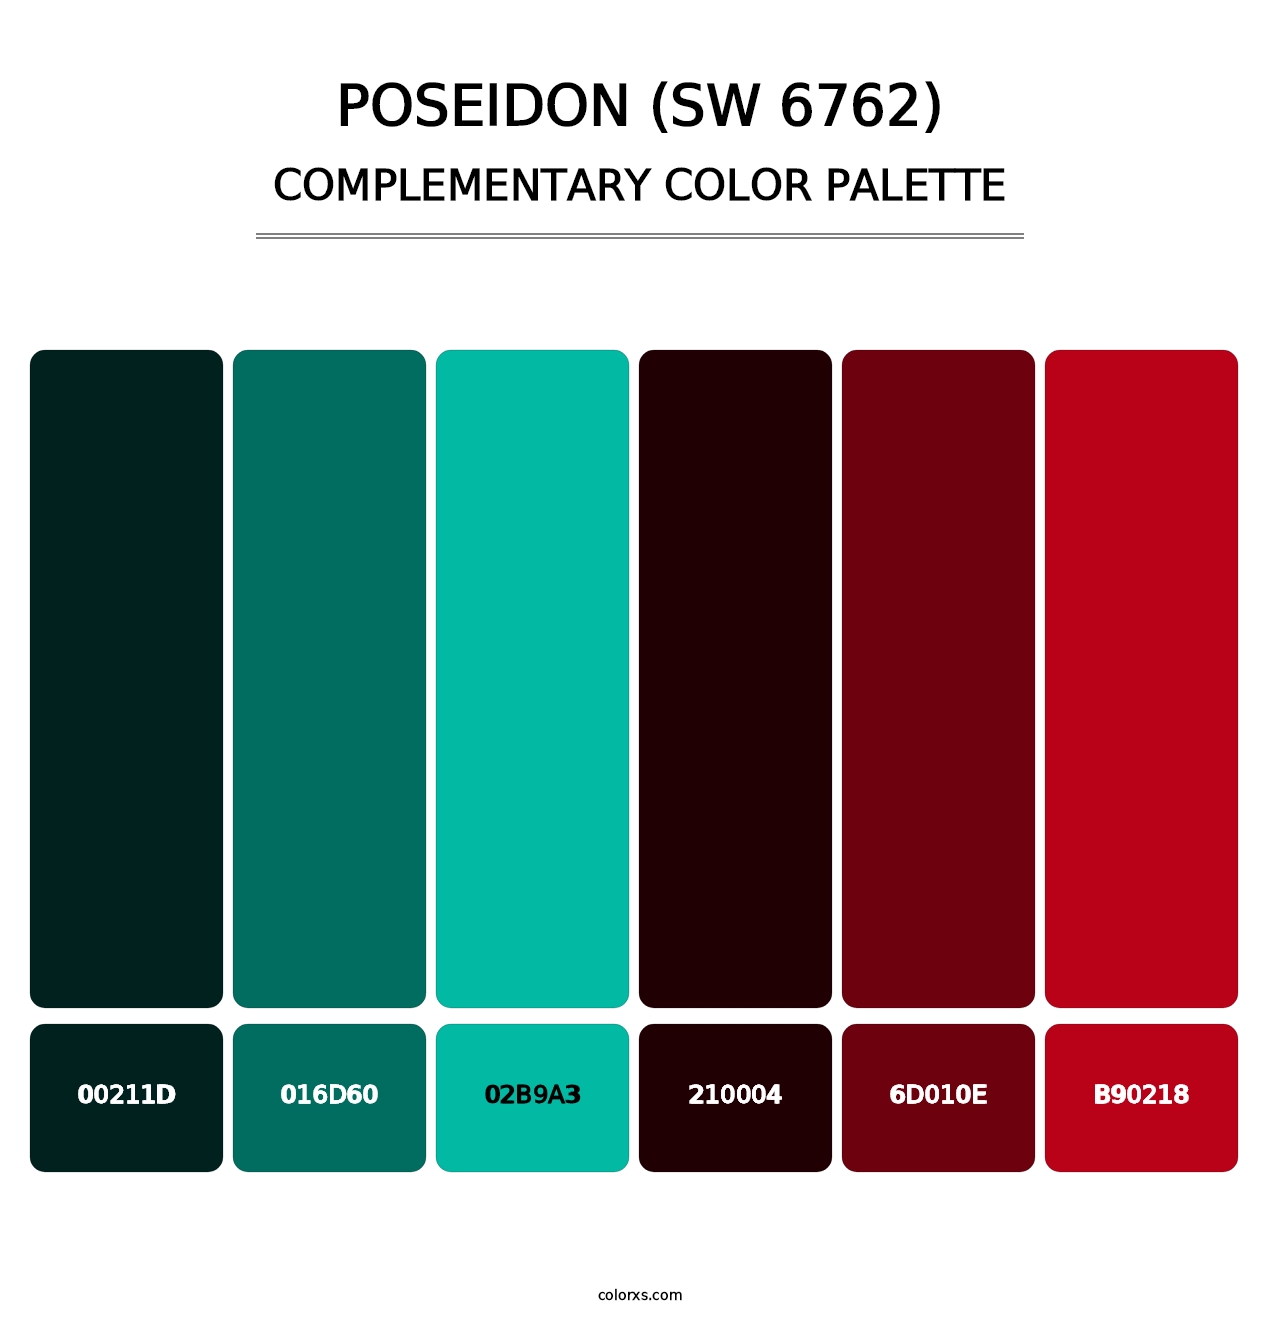 Poseidon (SW 6762) - Complementary Color Palette